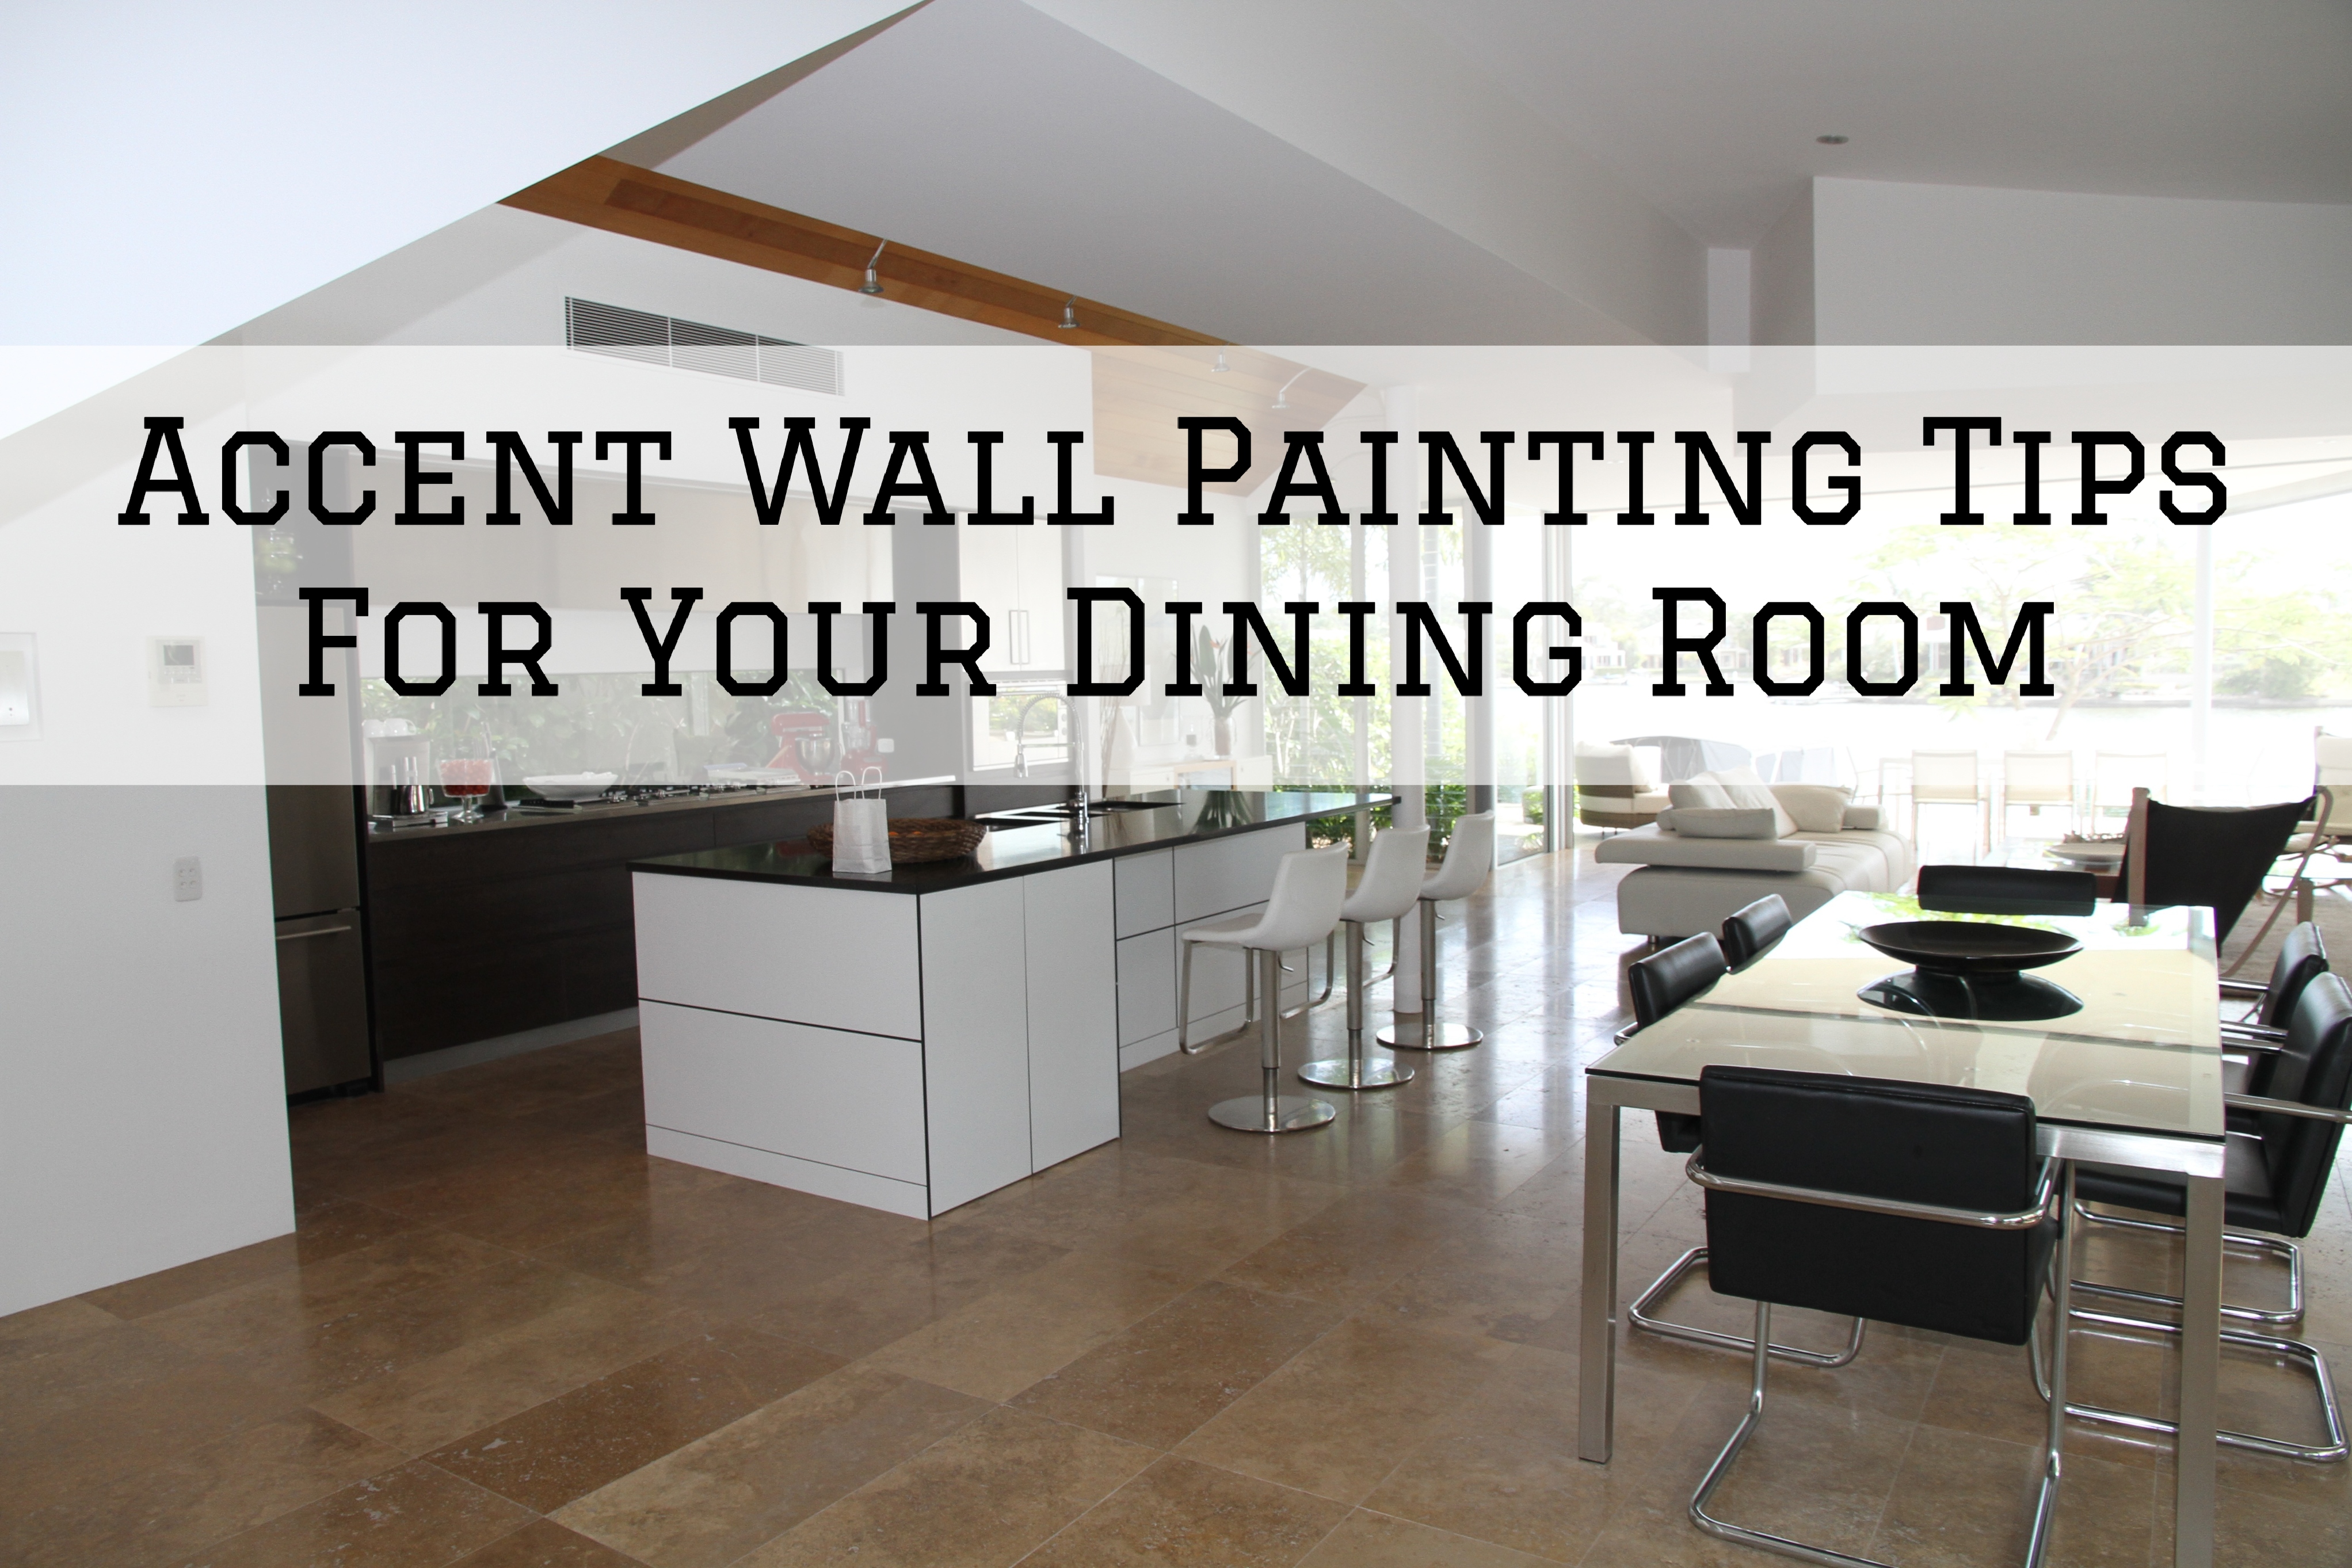 2022-02-14 Millers Painting Kanata Ontario Dining Room Accent Wall Painting Tips